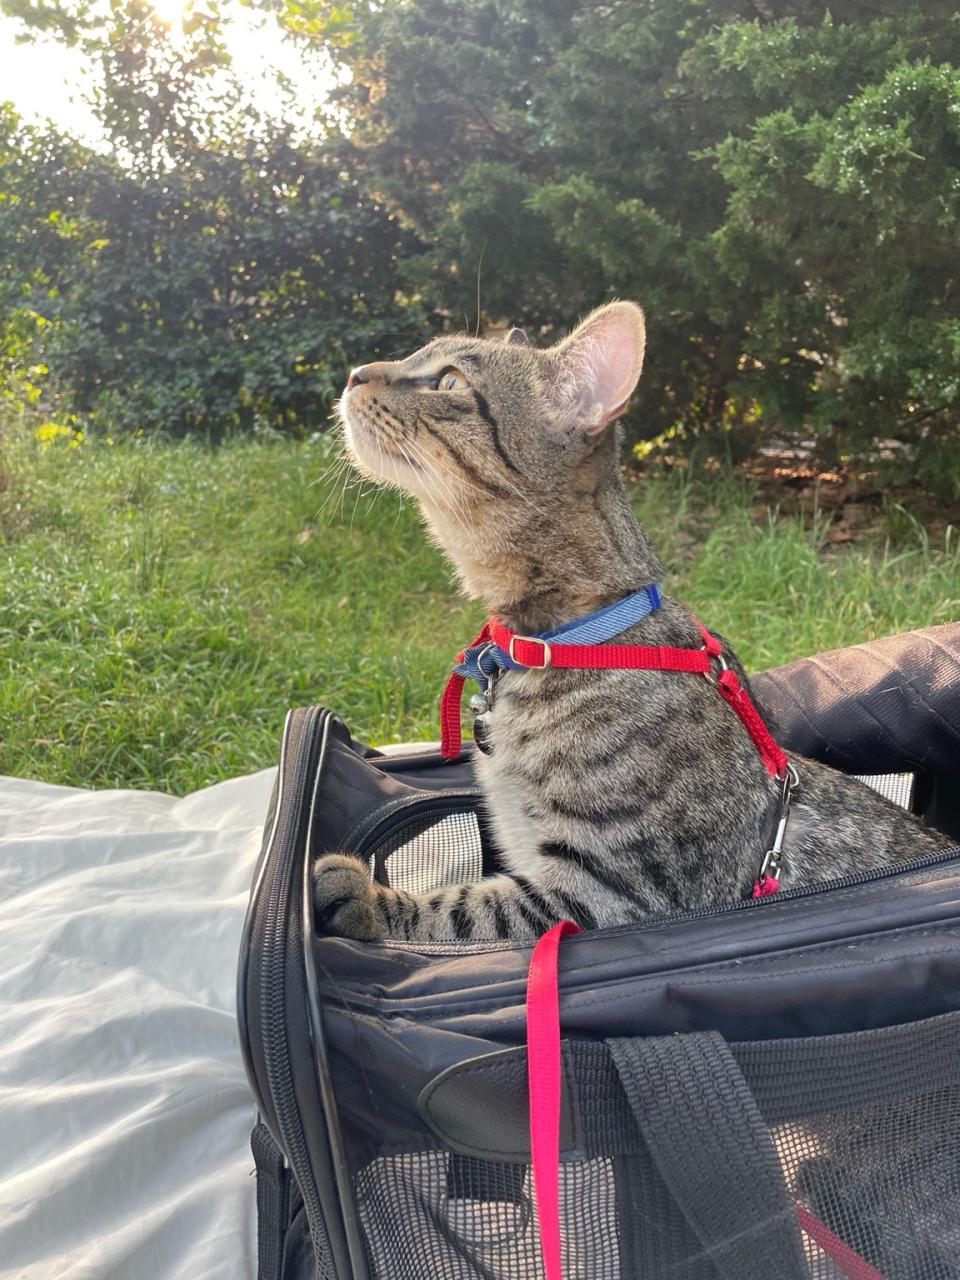 Mouse enjoying the park from the safety of his carrier. (Colleen Grablick for The Washington Post)